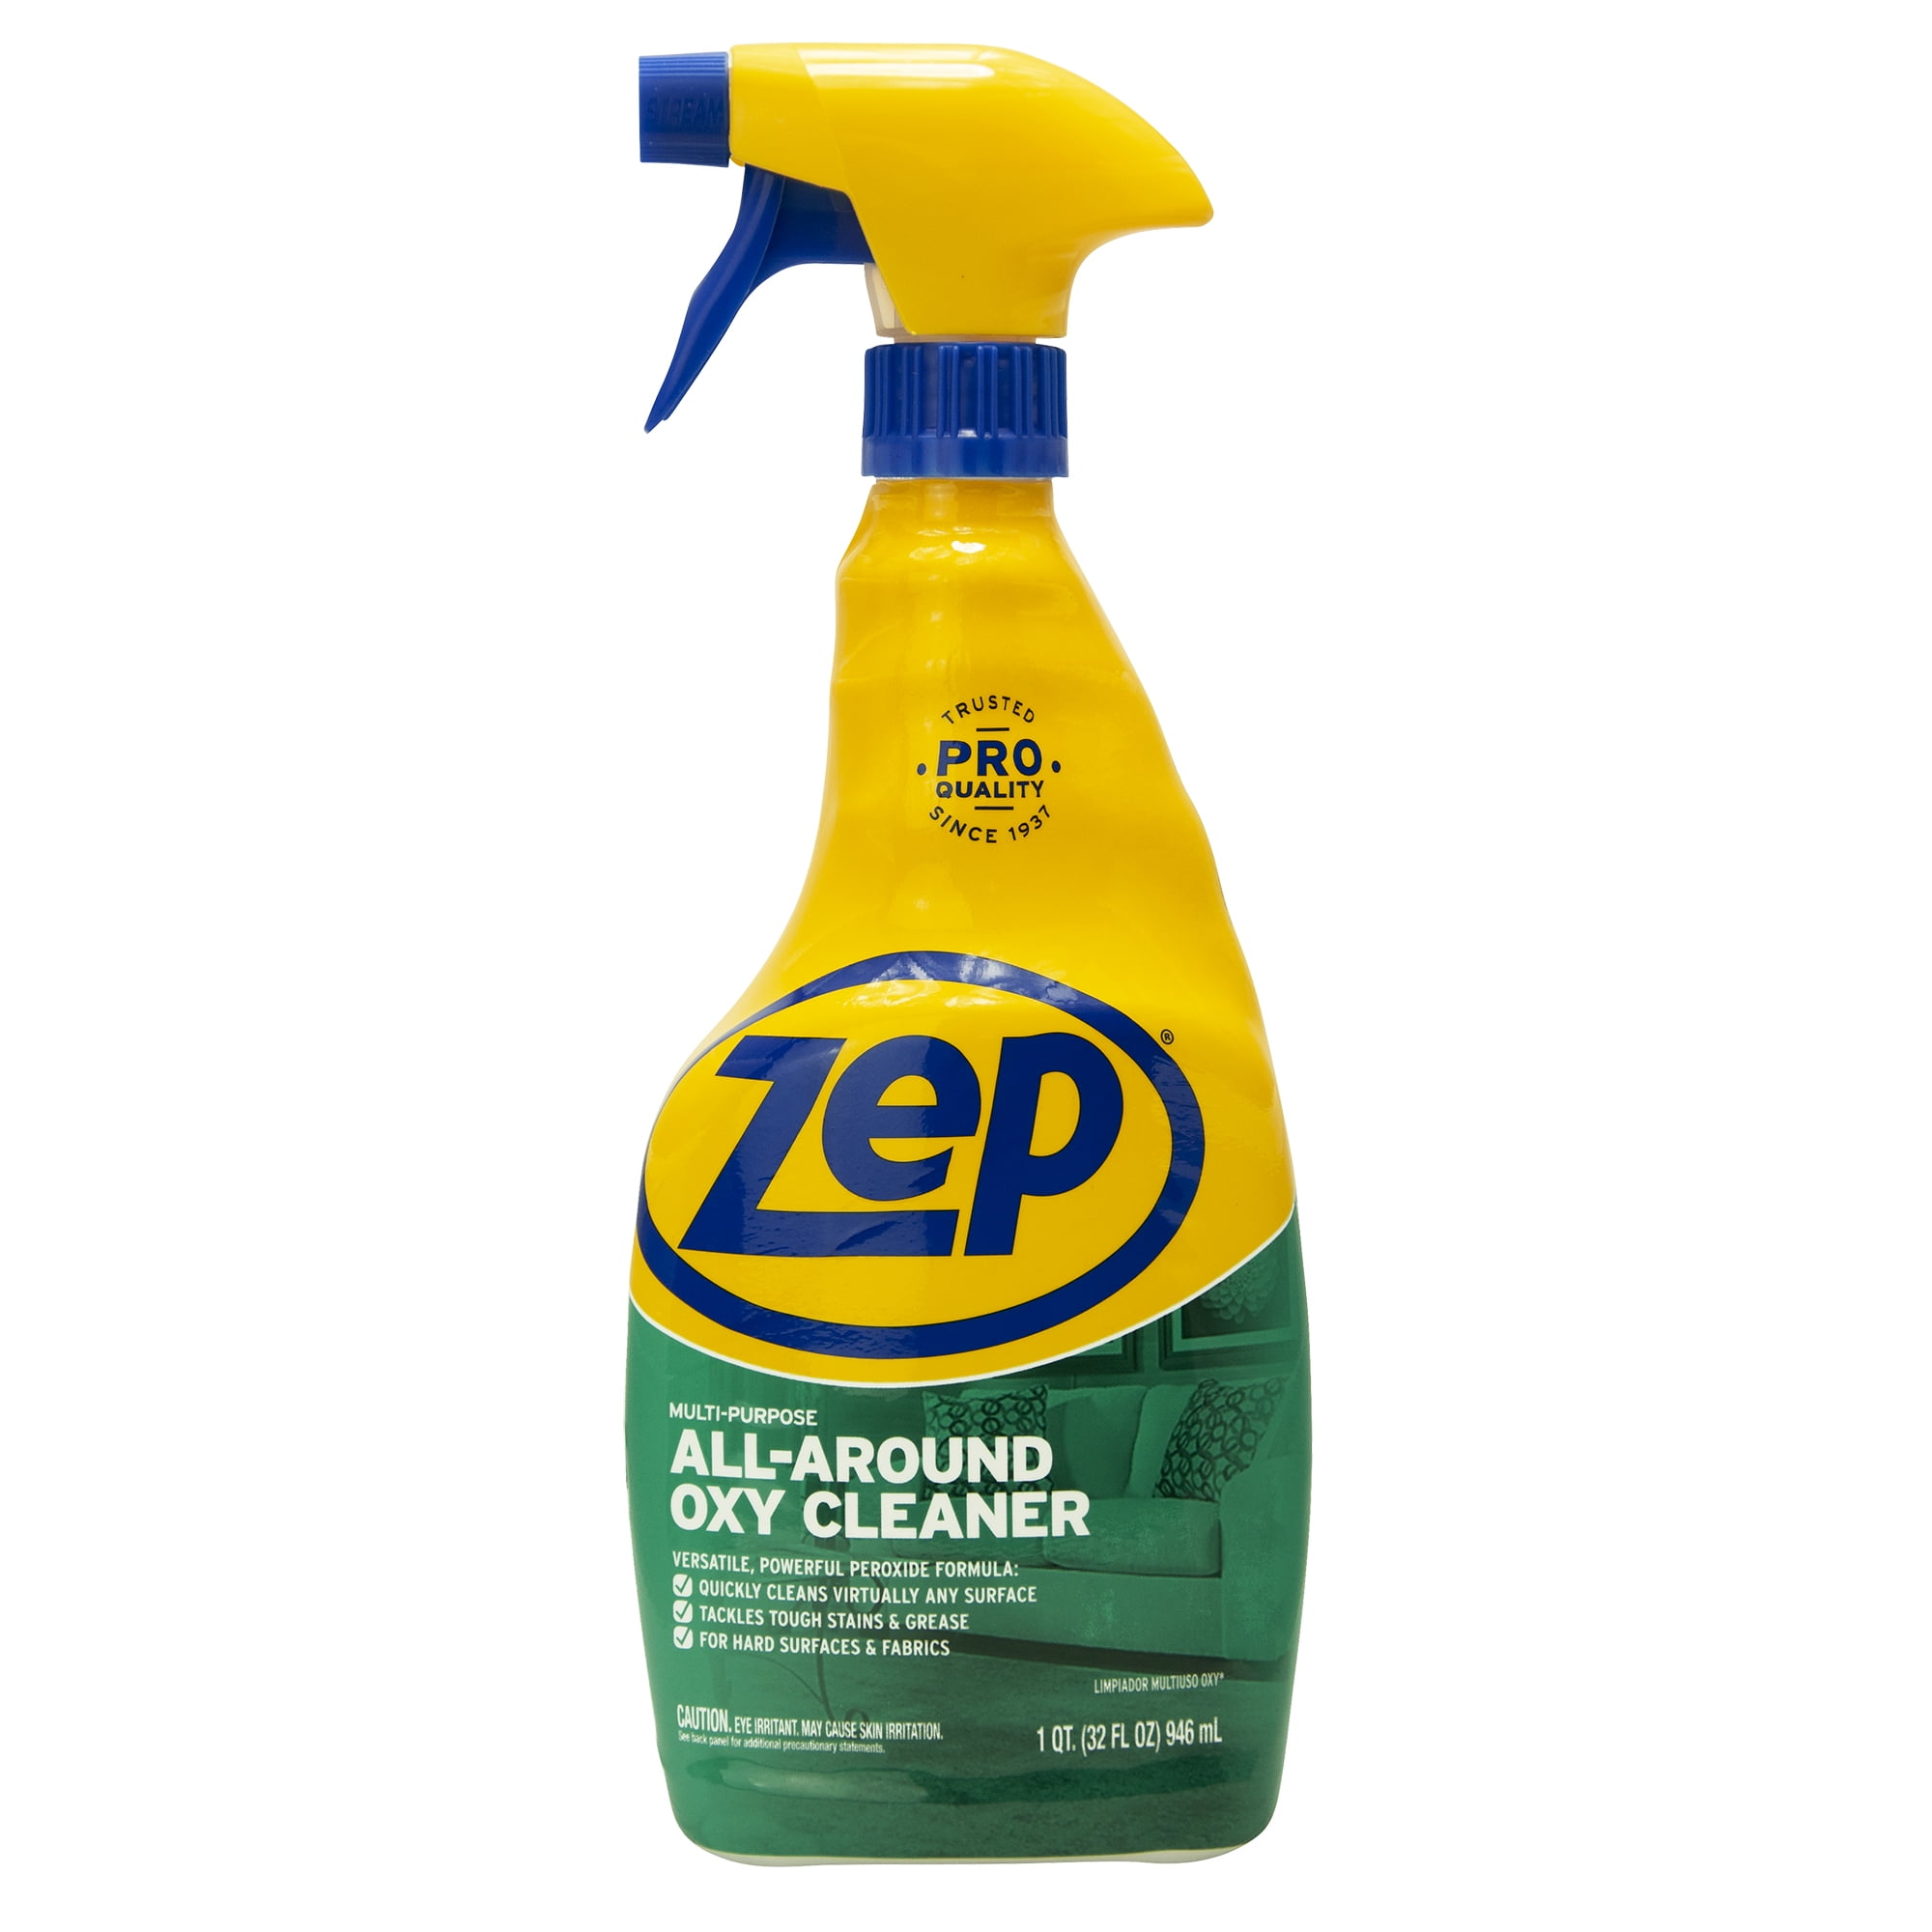  Elbow Grease® ALL PURPOSE DEGREASER 500ml : Health